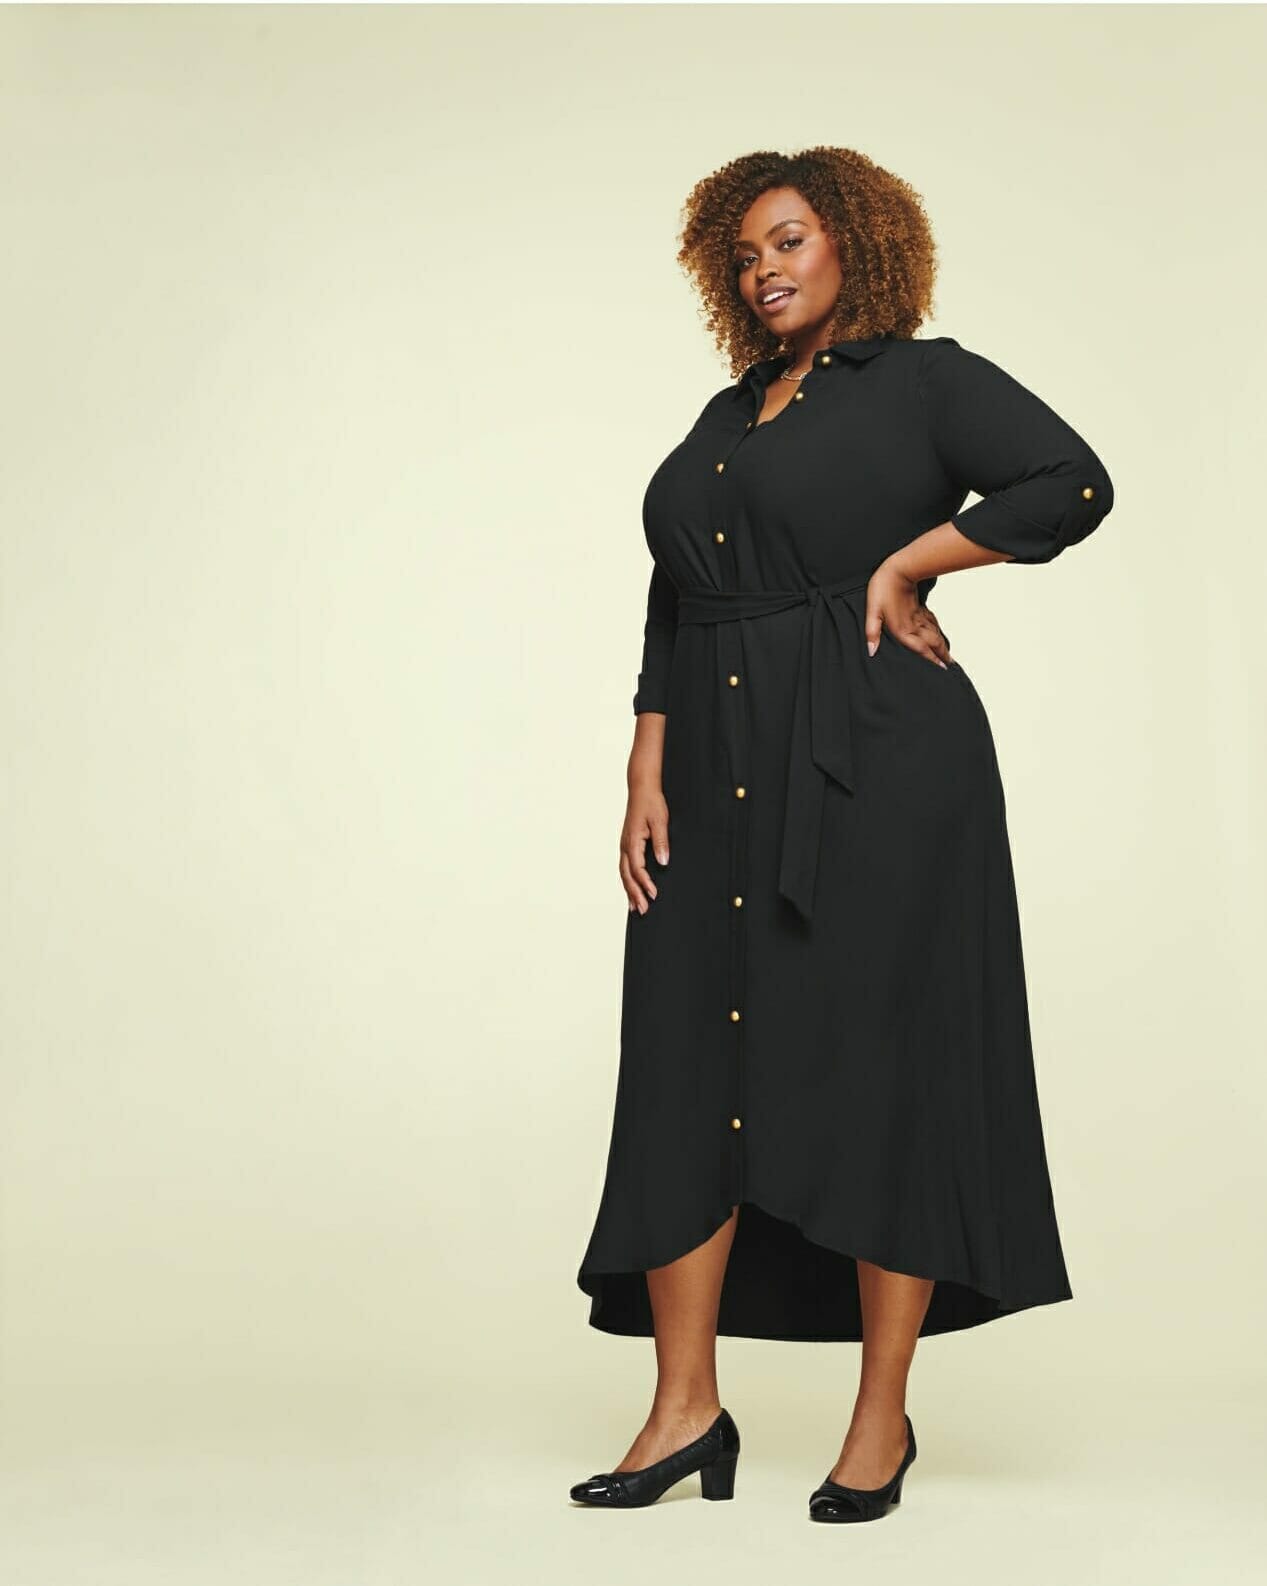 Best Places To Buy Plus Size Clothing